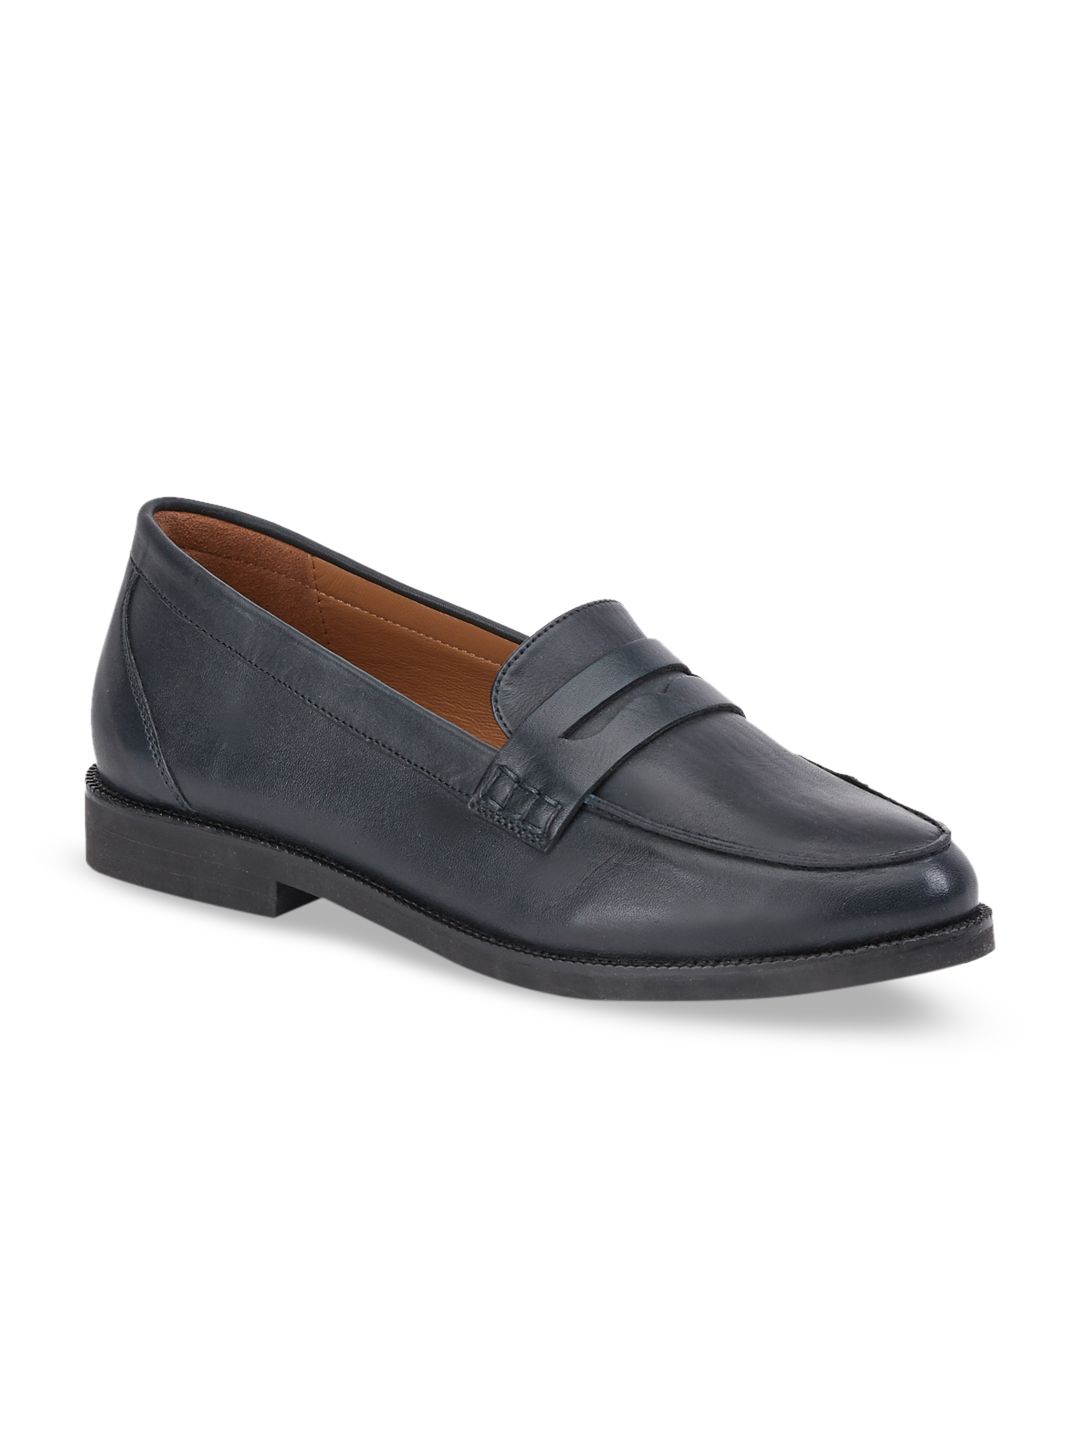 Saint G Women Navy Blue Solid Leather Formal Penny Loafers Price in India